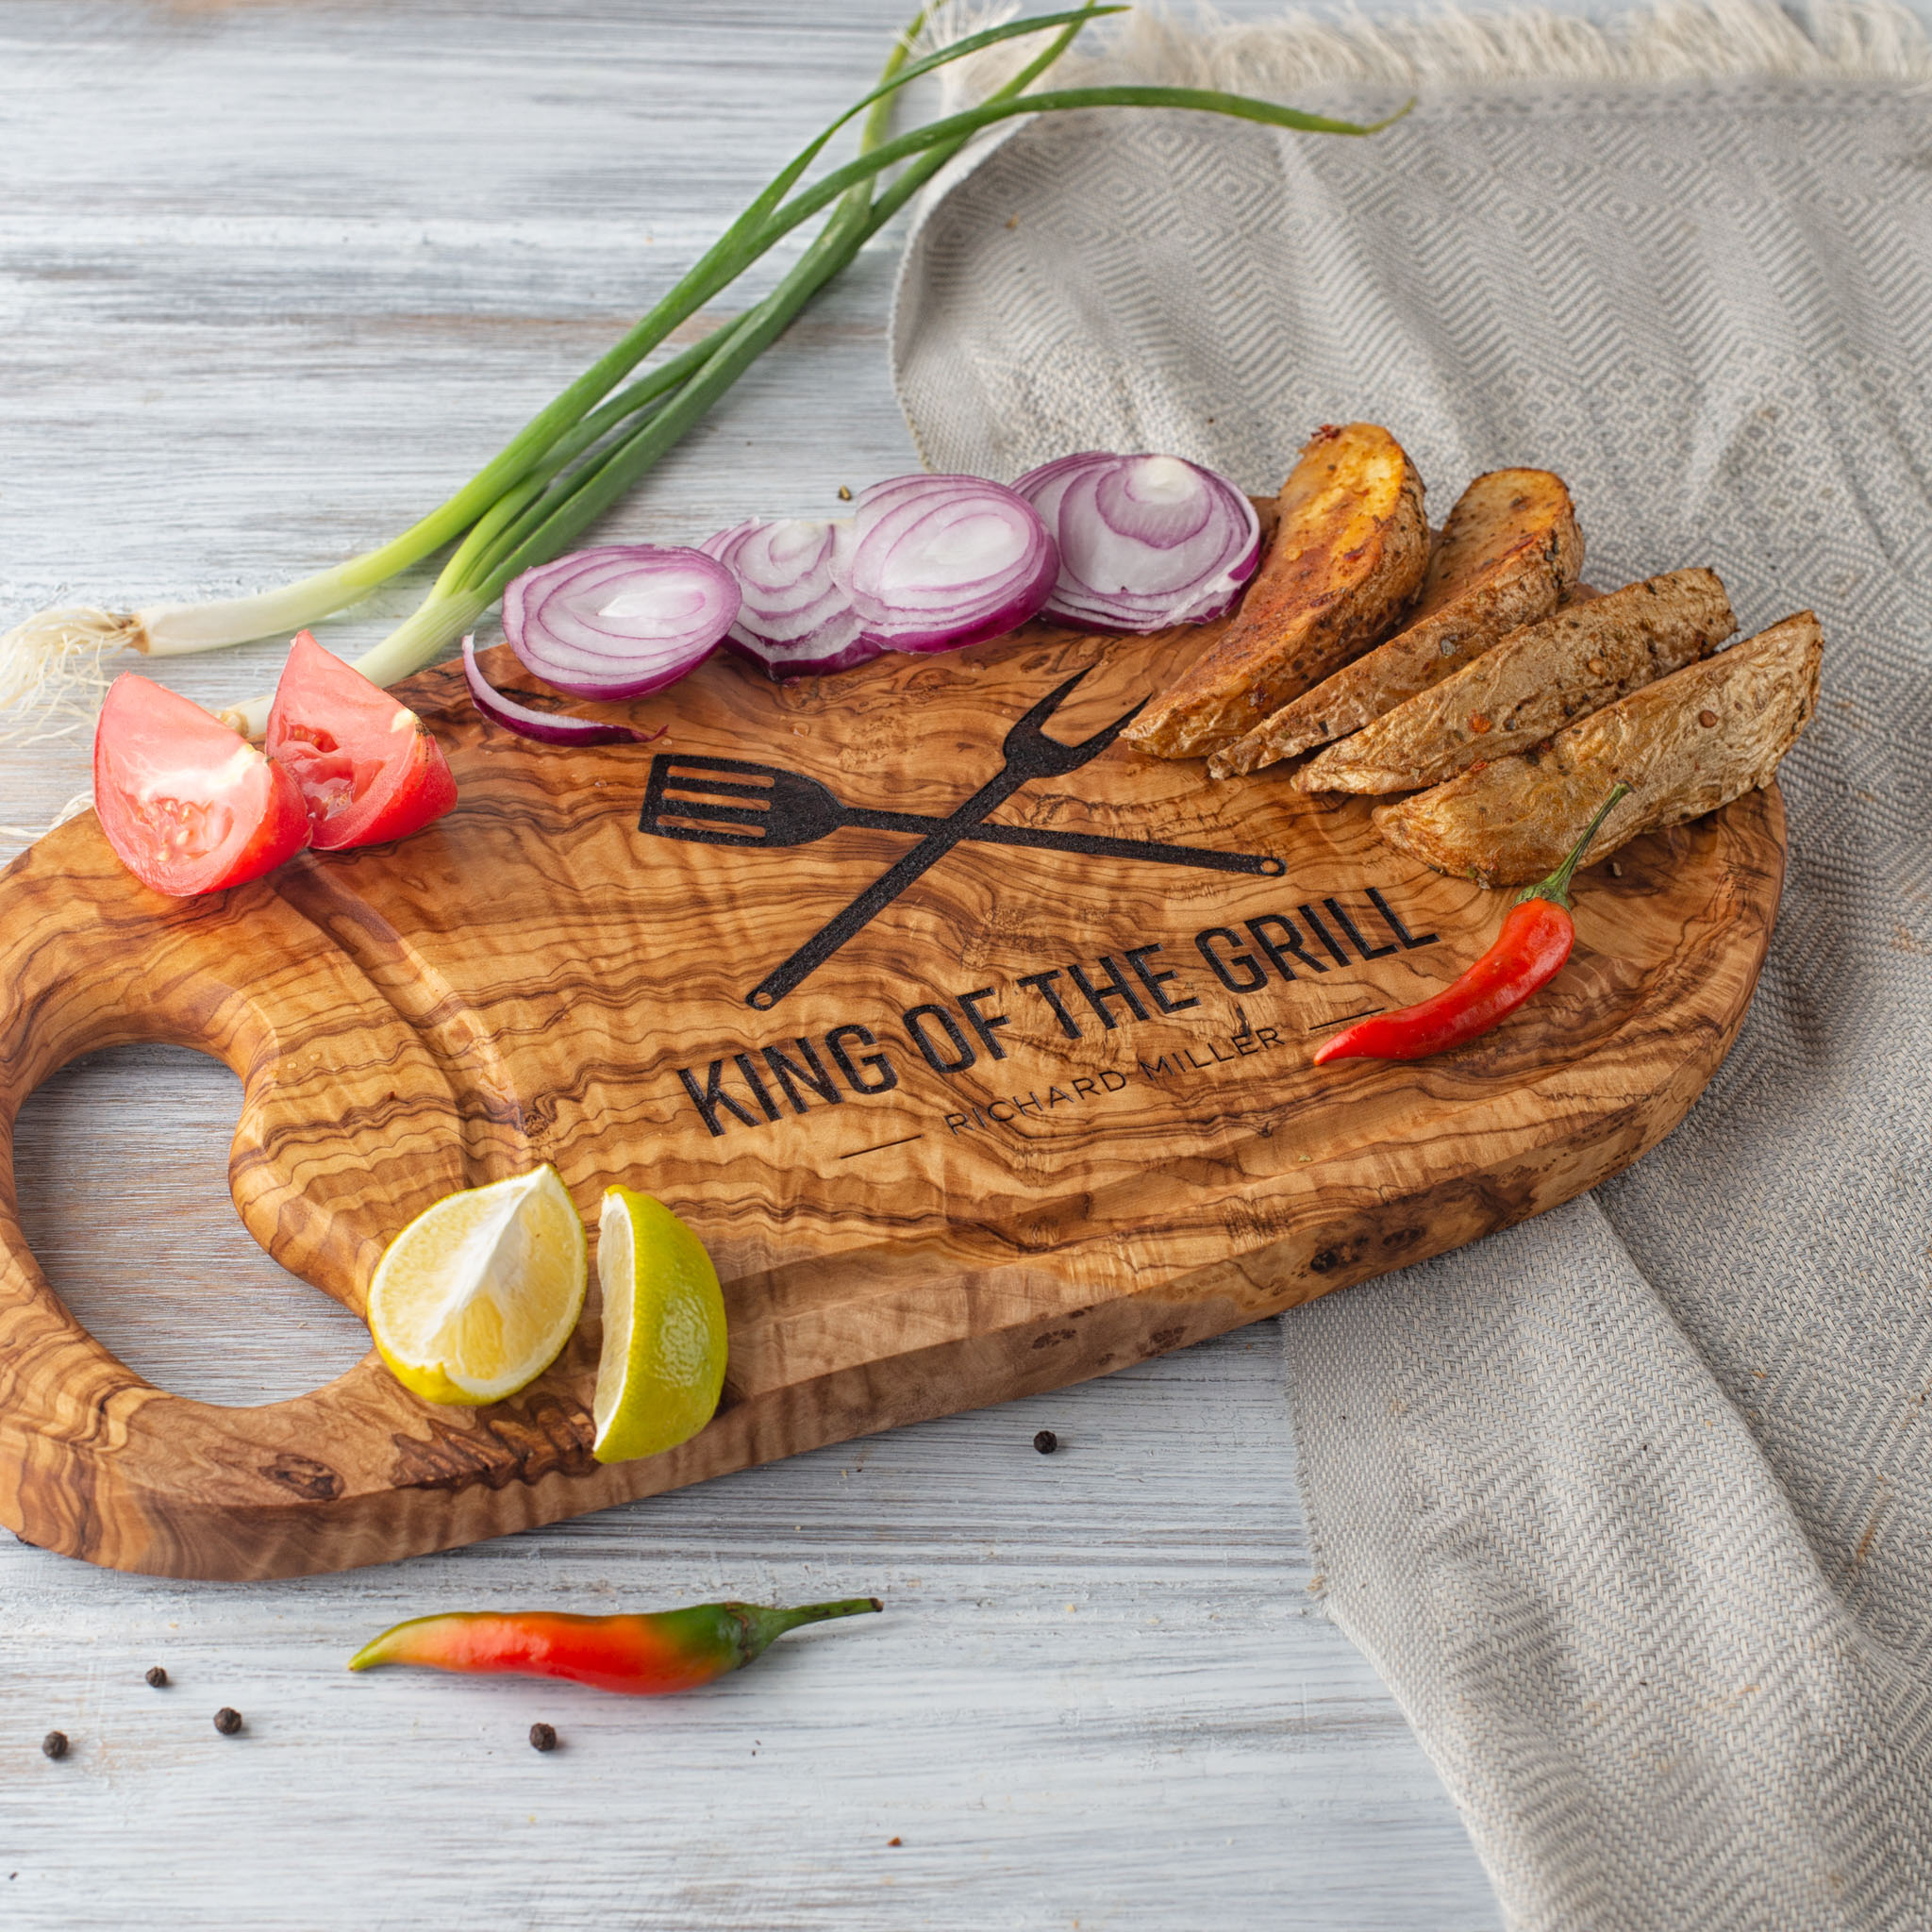 Personalized Grill Cutting Board  BBQ Olive Wood Cutting Board - Forest  Decor